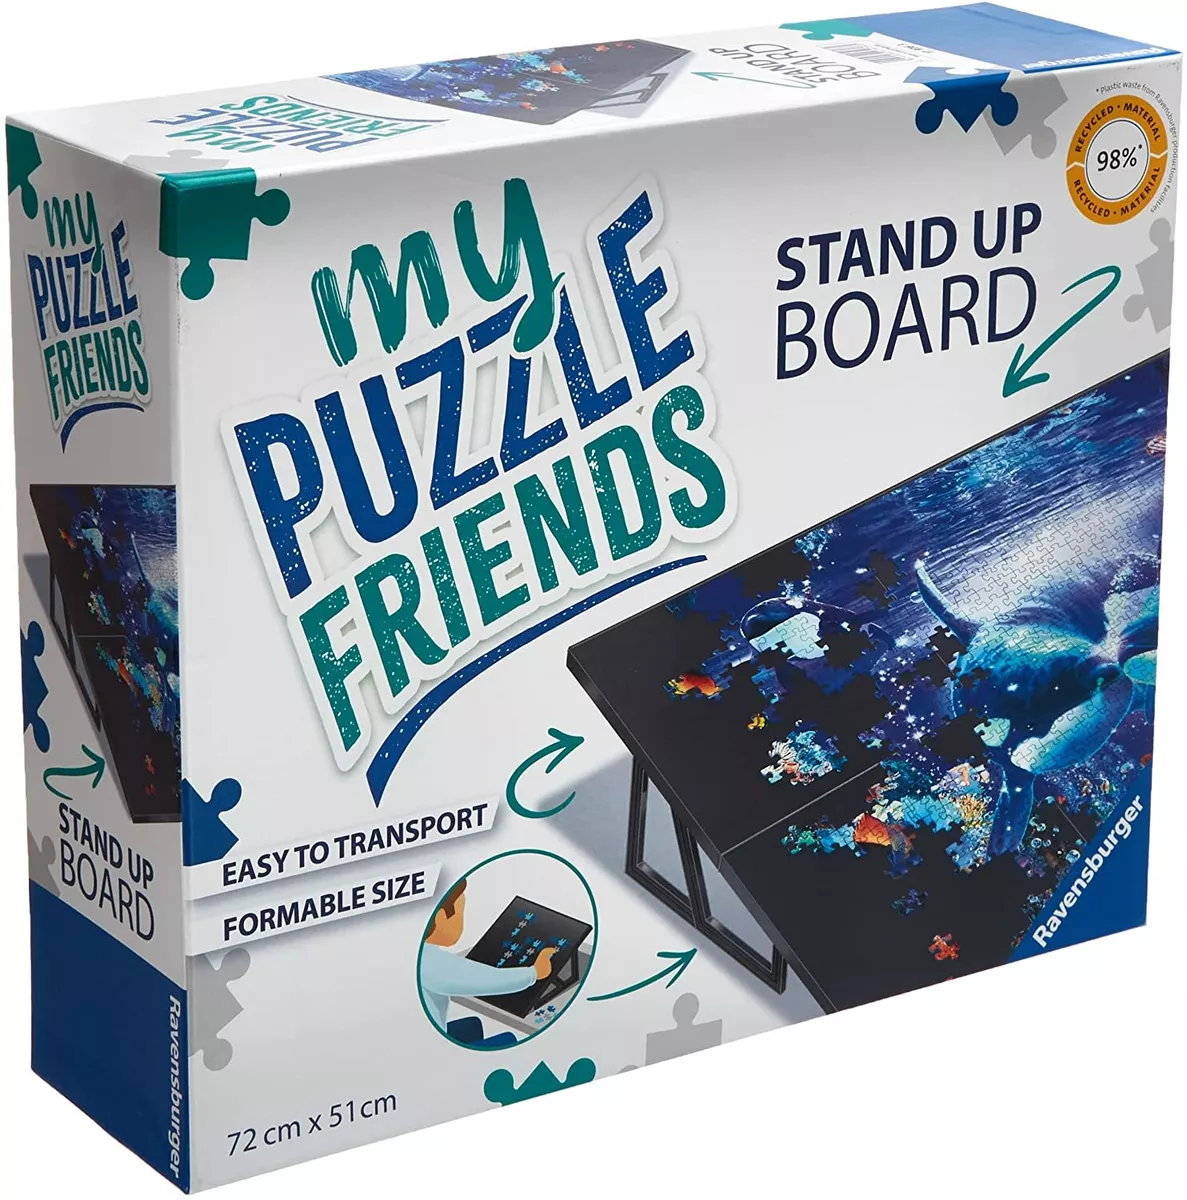 RAVENSBURGER STAND UP BOARD PUZZLE BOARD . ITEM NR.17976 | eBay